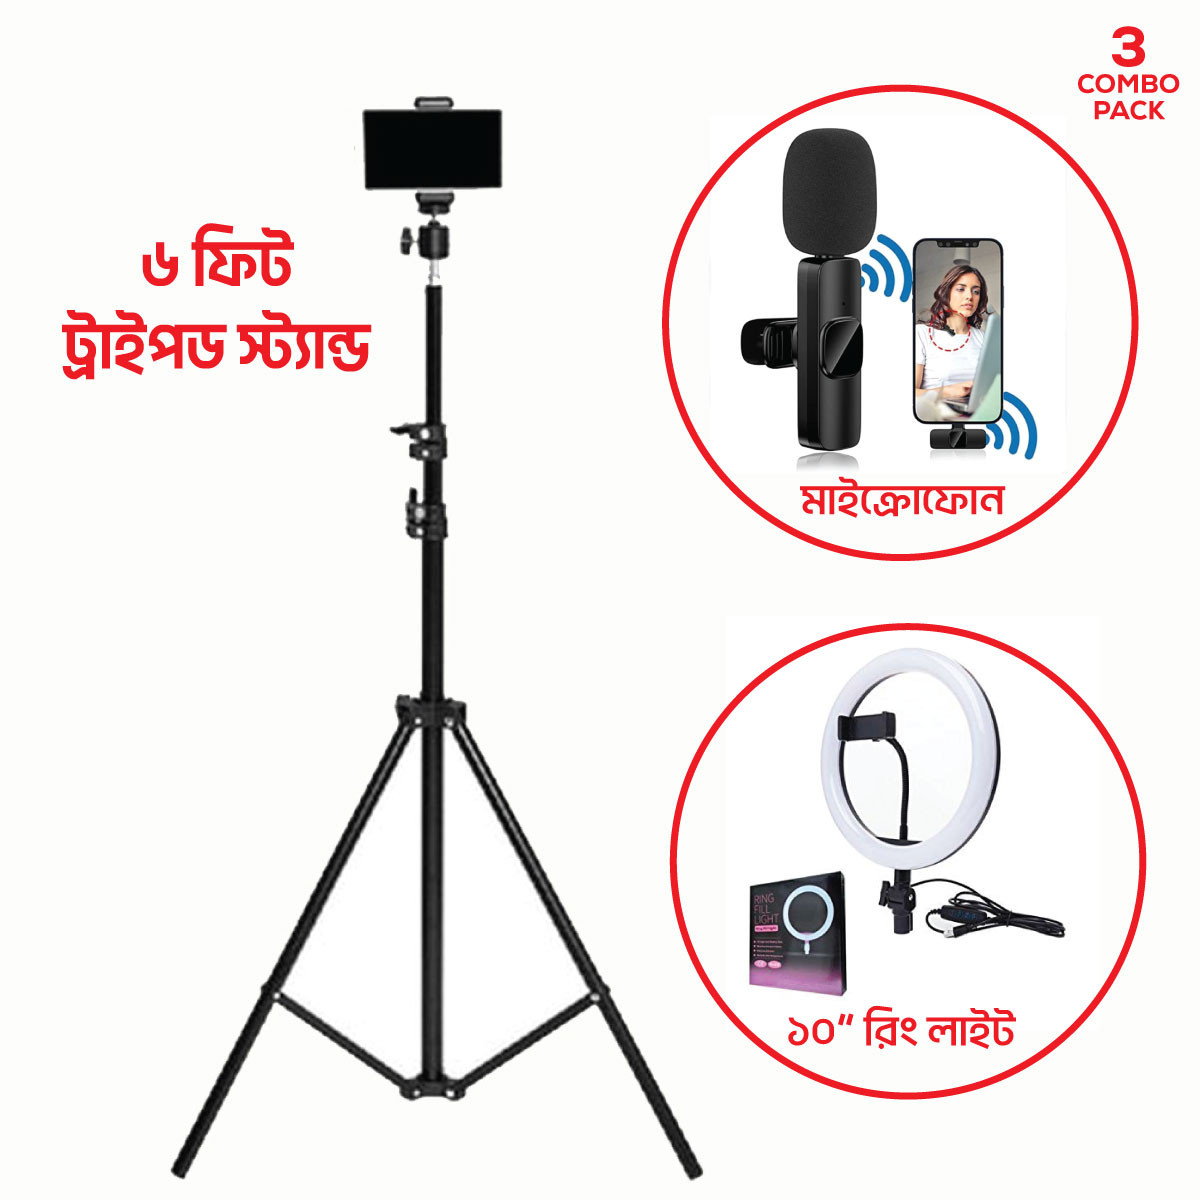 6 Fit Tripod Stand +10" Ring Light Product Code: 3607